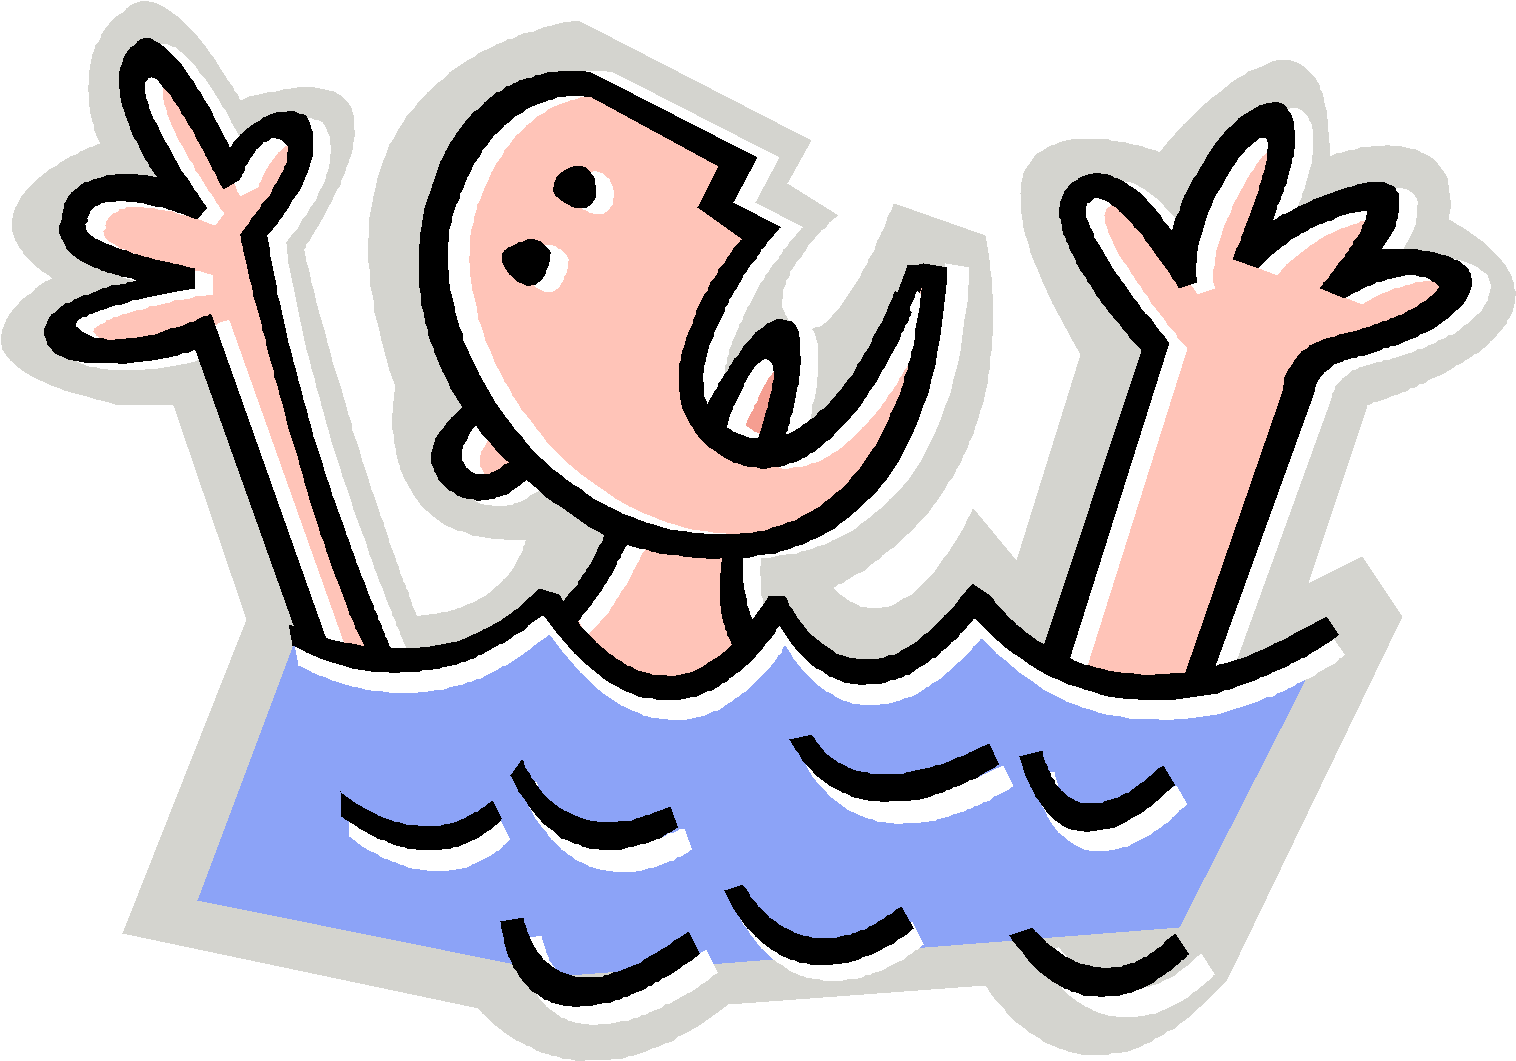 Download and share clipart about Name That Rip Current Name That Wave - Ono...